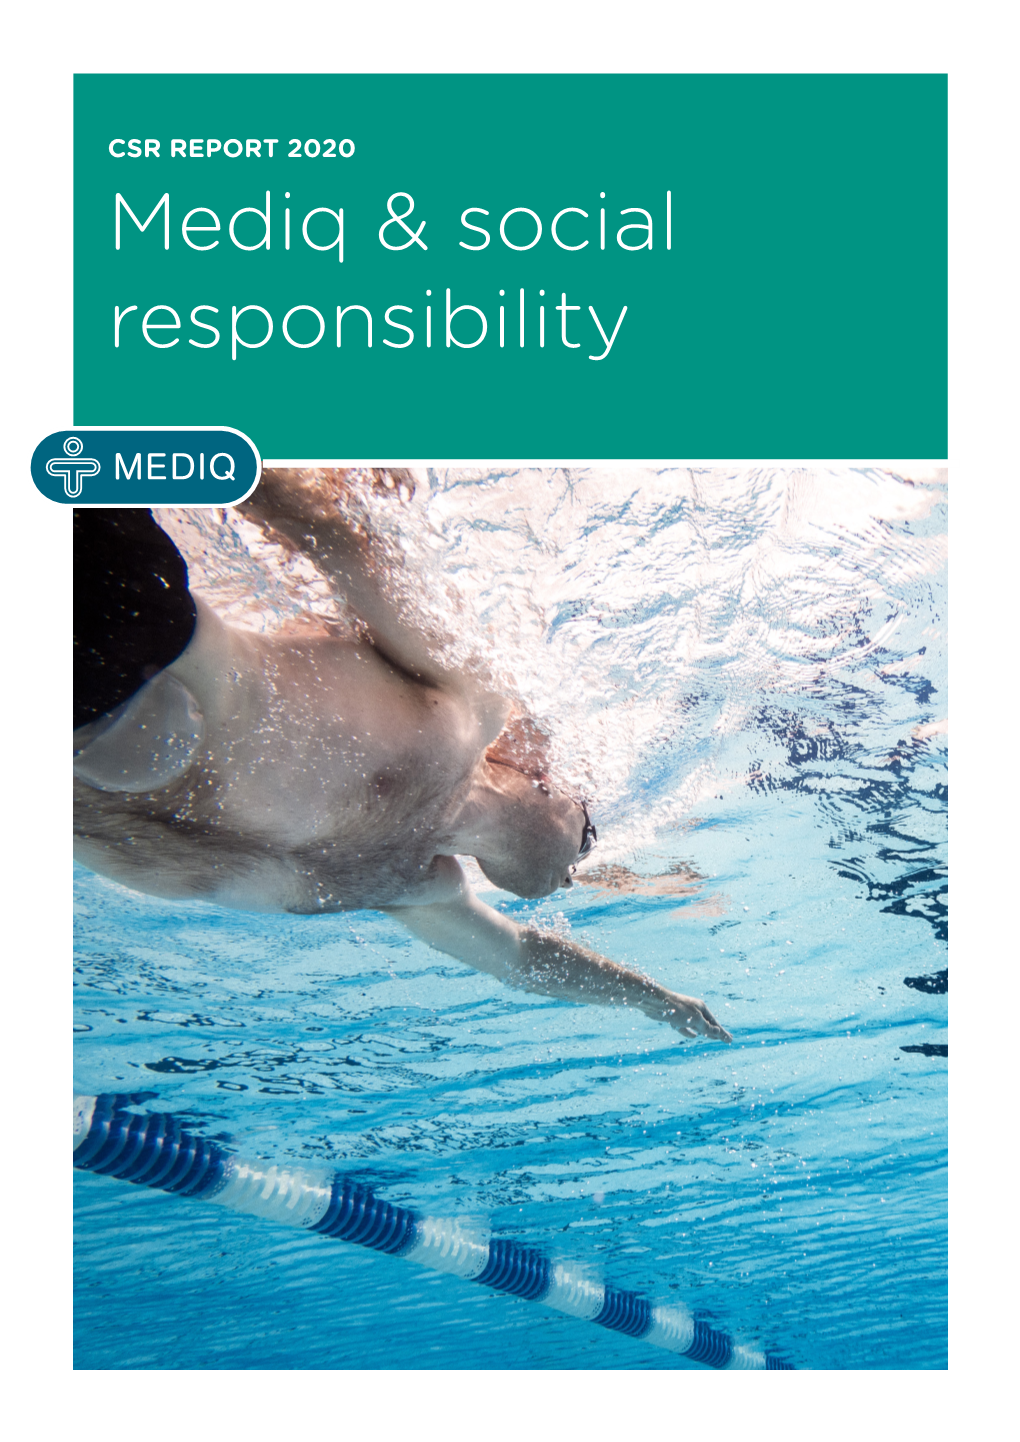 Download Our CSR Report